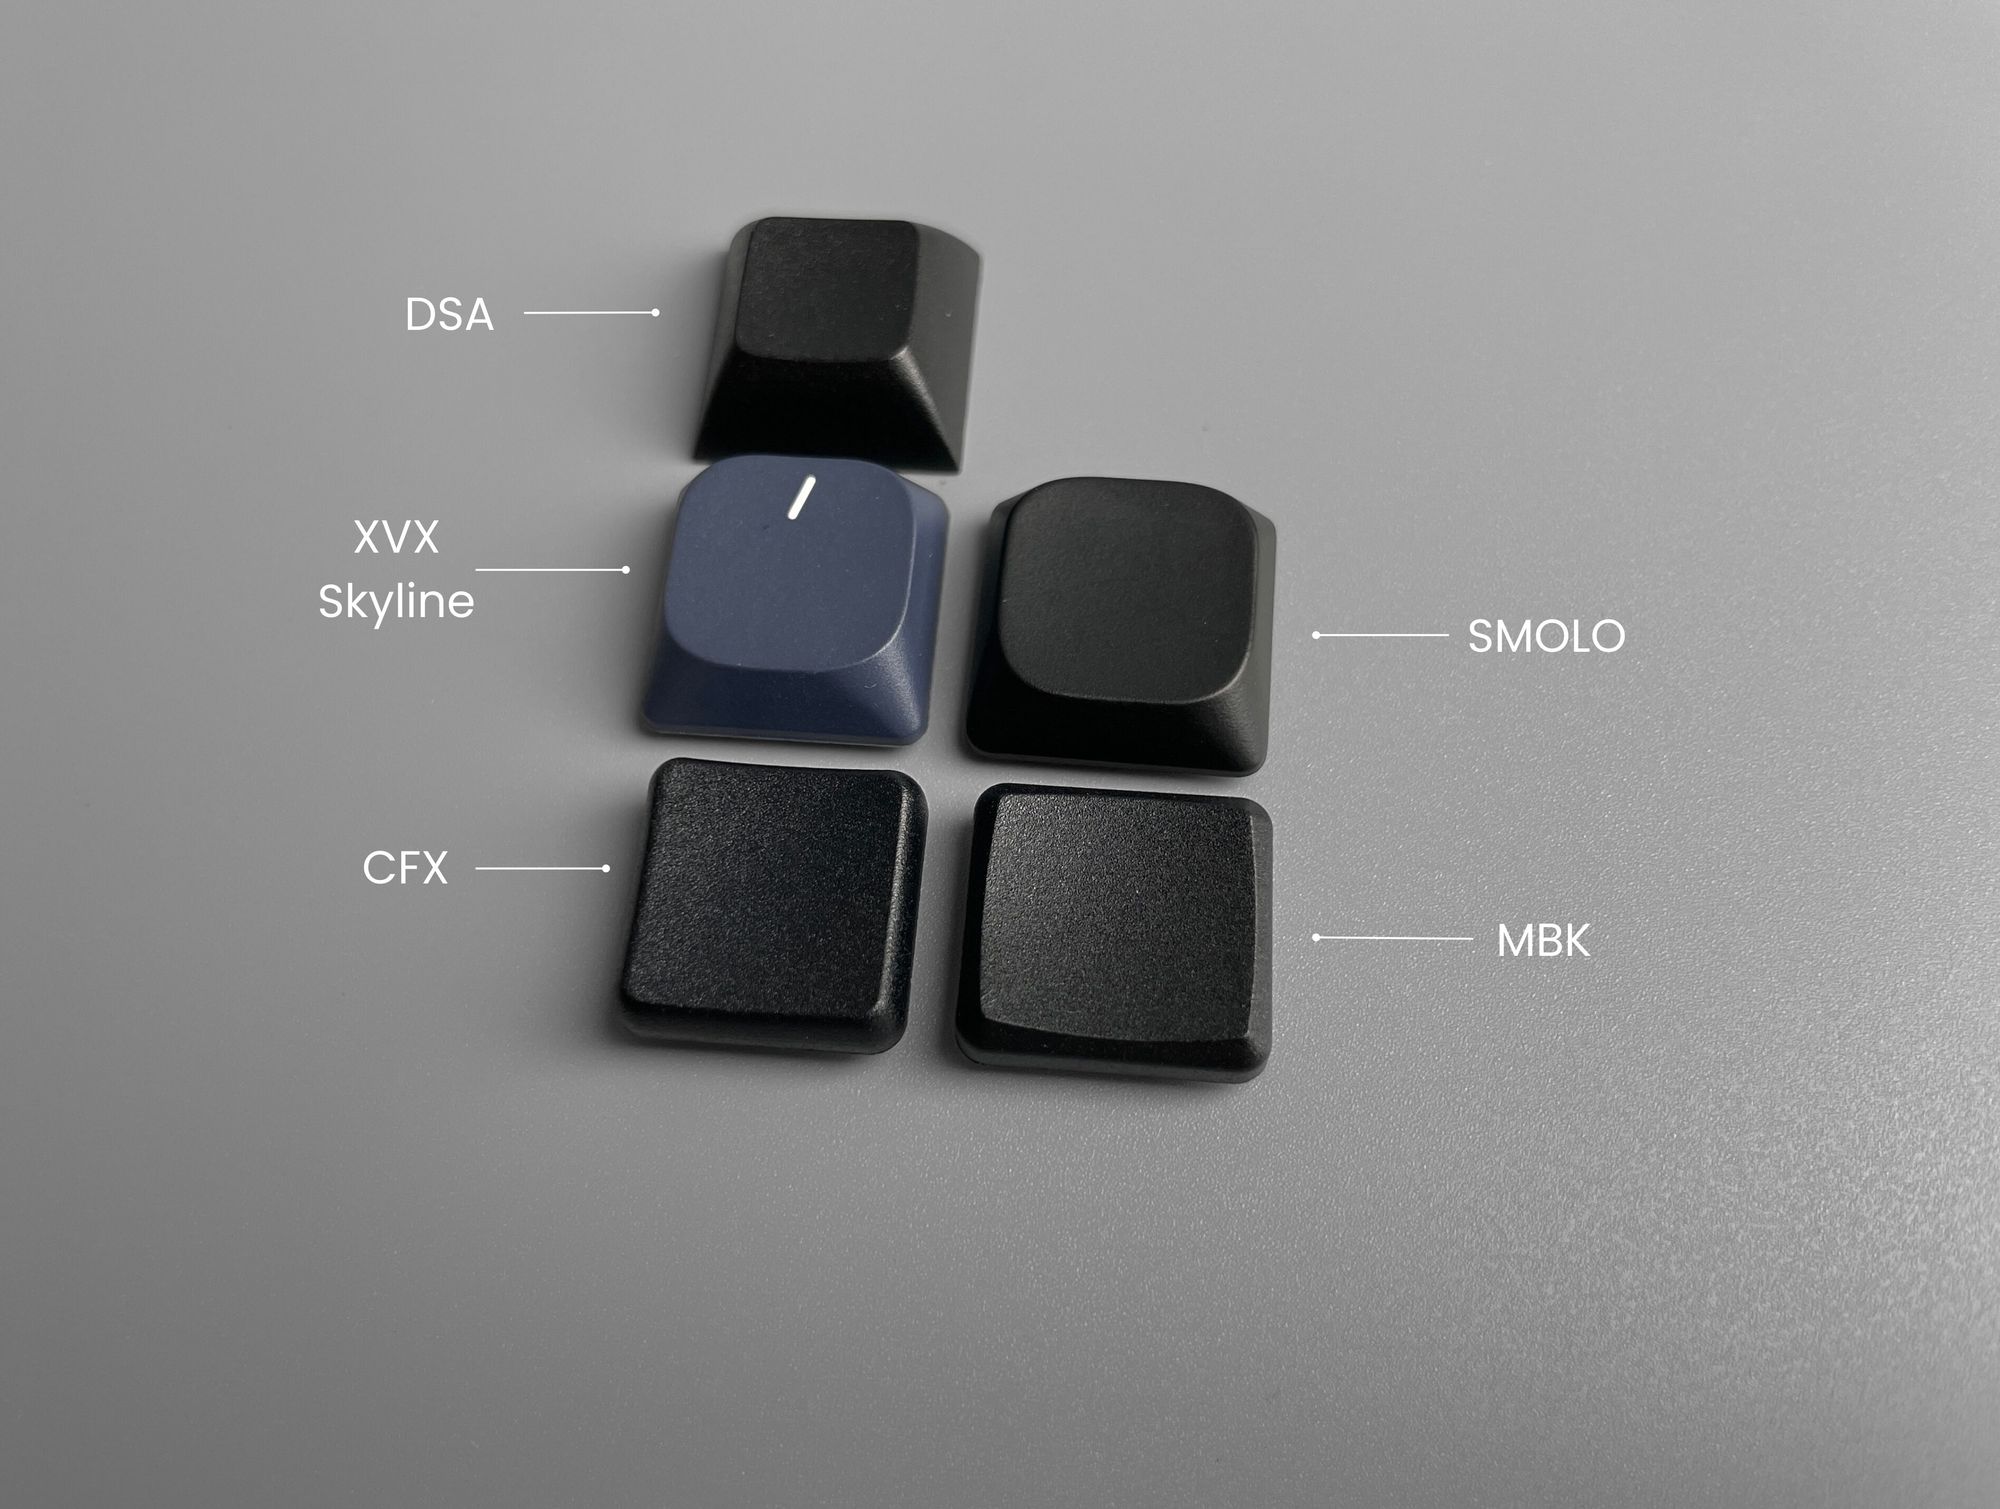 The Keycaps of Gateron Low Profile Key Switches and Kailh Choc v1 Key Switch